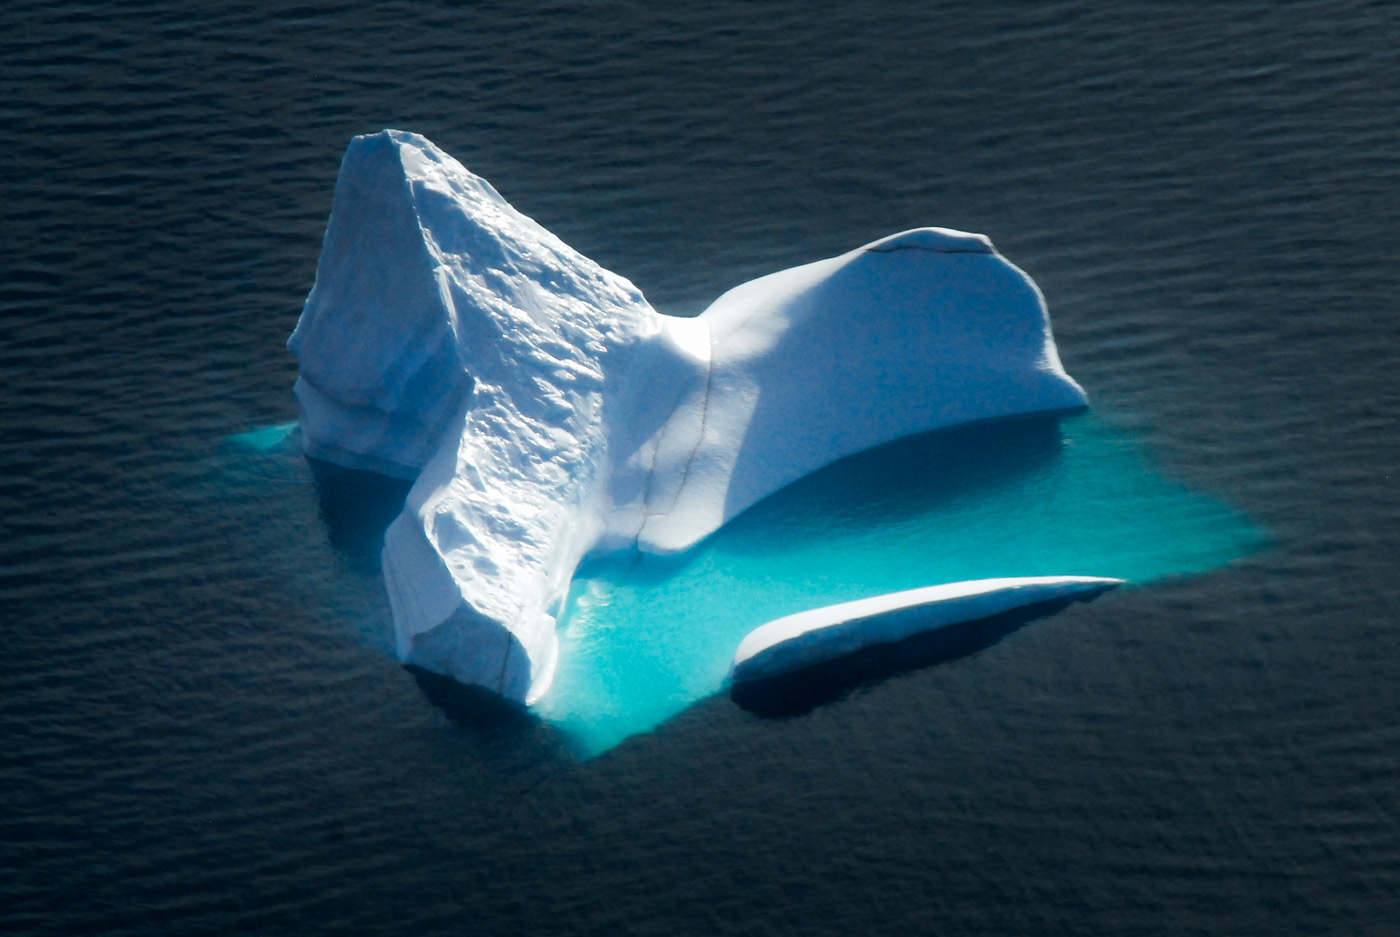 Iceberg seen from Helicopter, Western Greenland, 2007